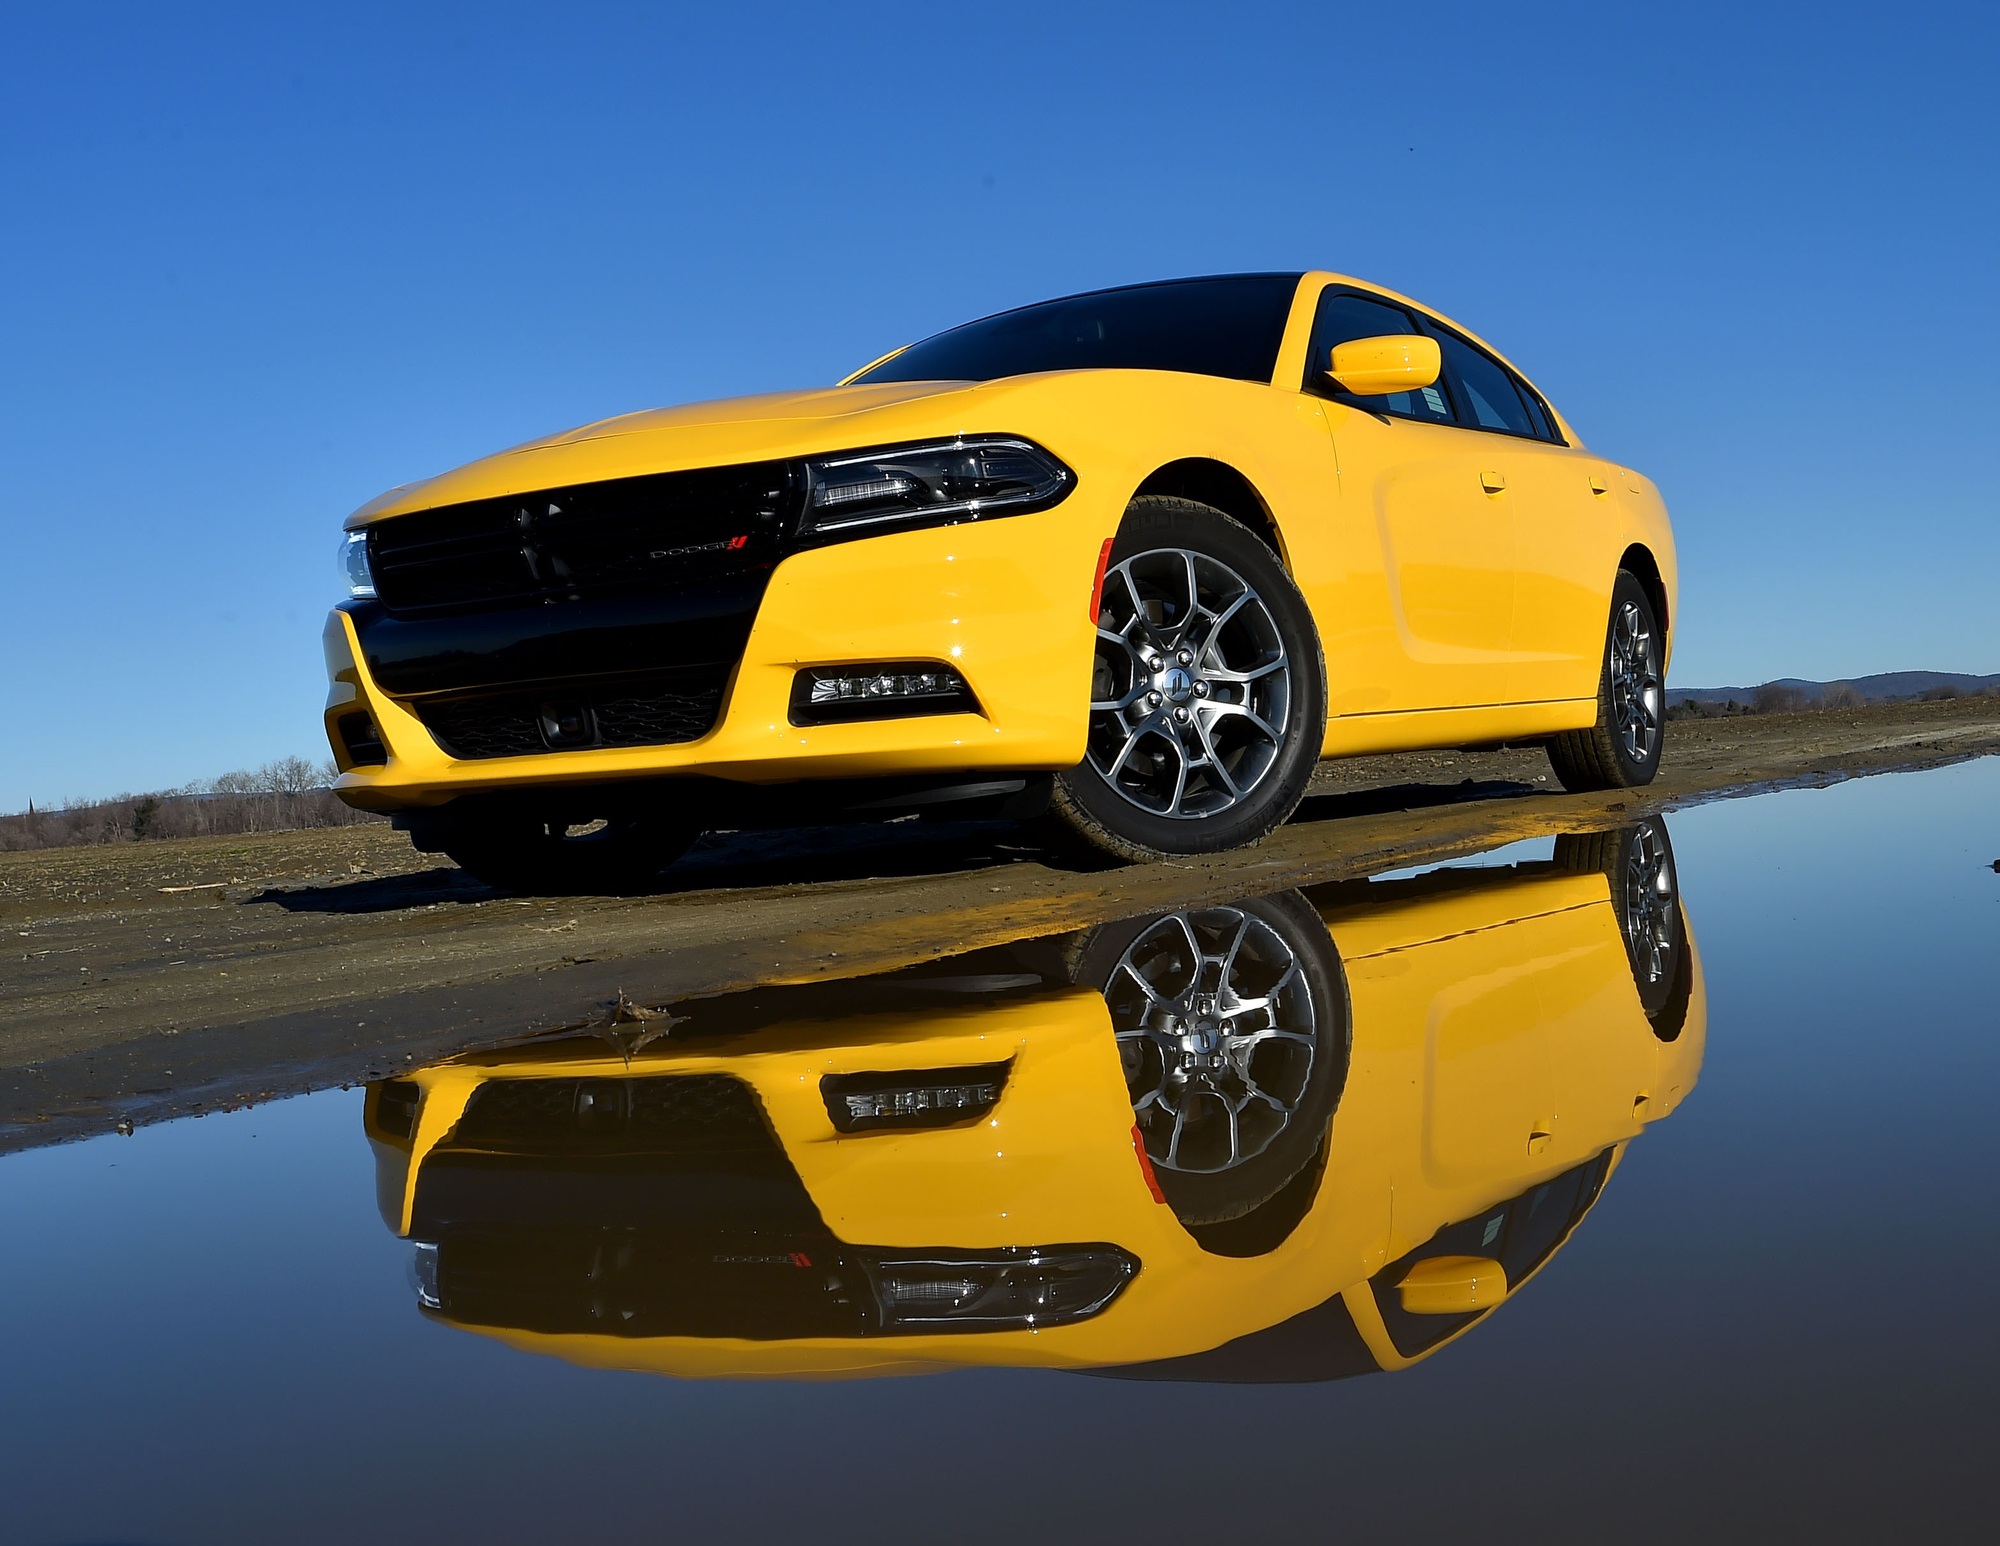 The Dodge Charger, pictured here in yellow, shares architecture with a Mercedes-Benz E-Class